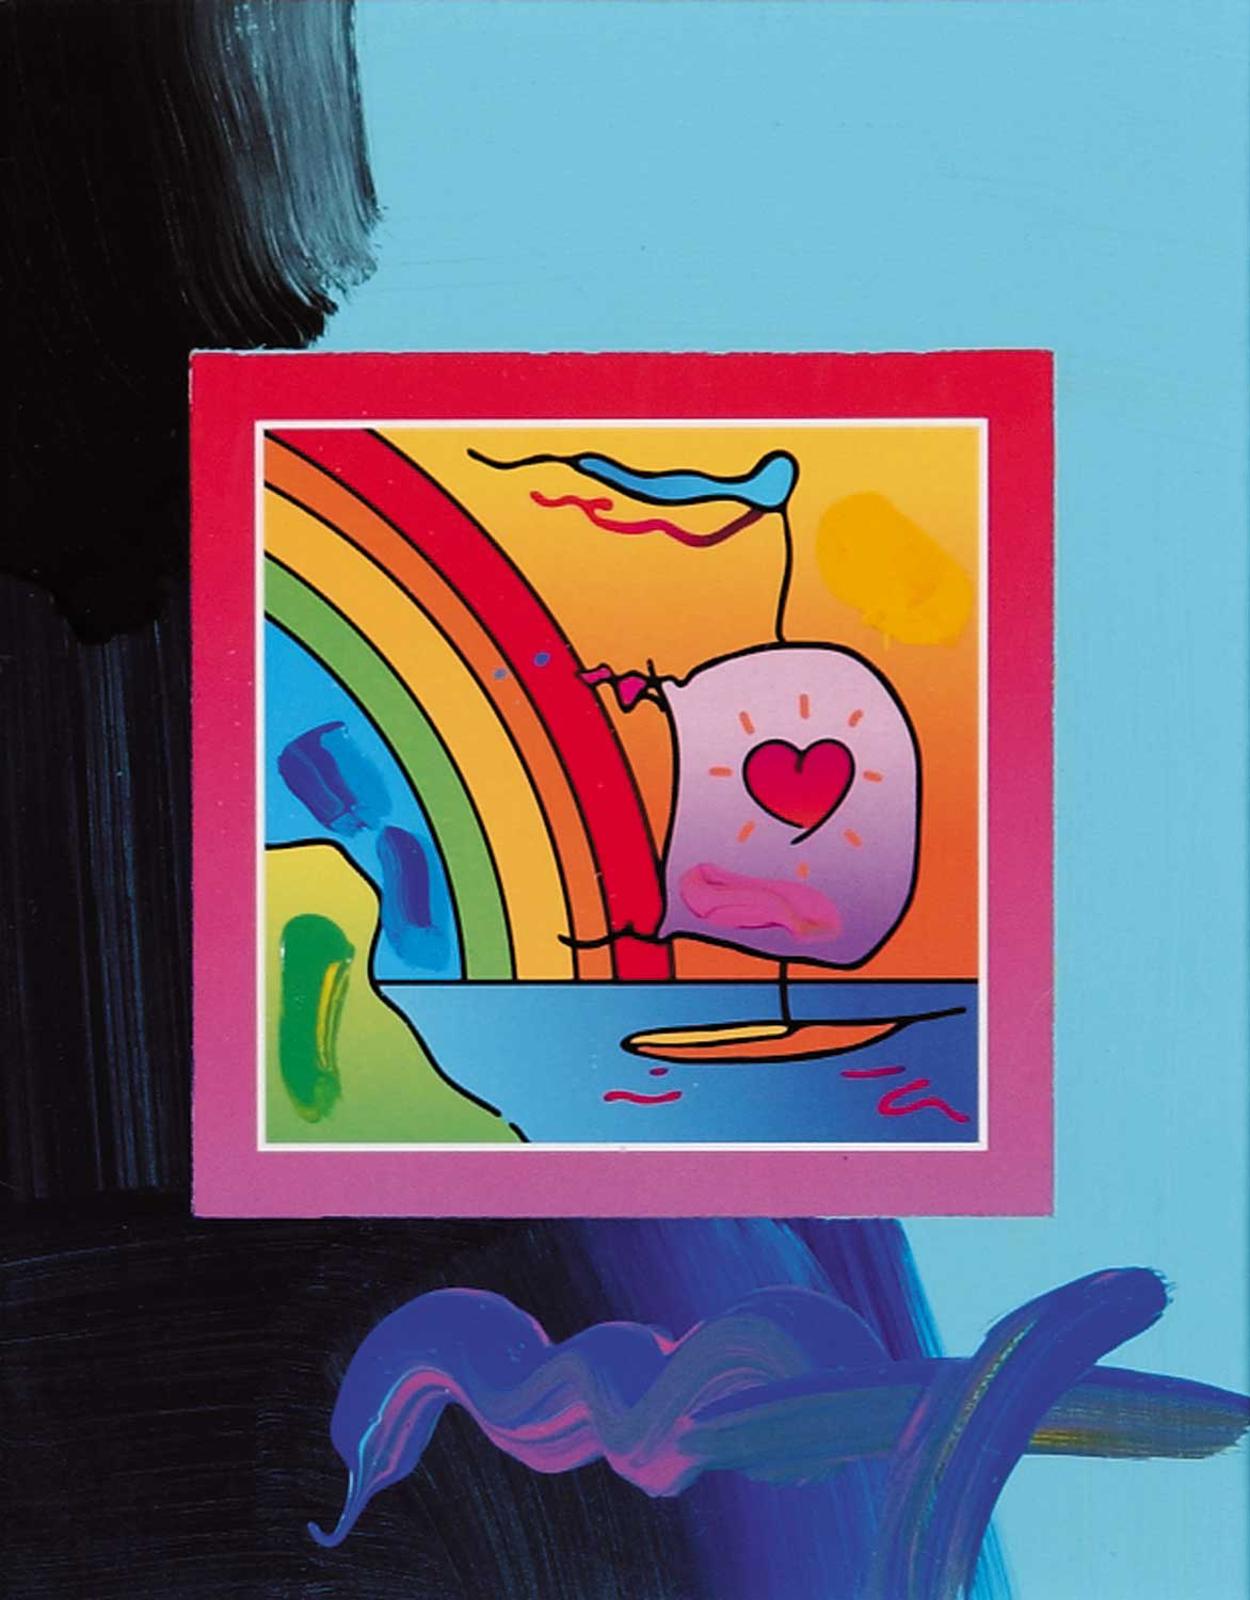 Peter Max (1937) - Sail Boat with Hearts on Blends